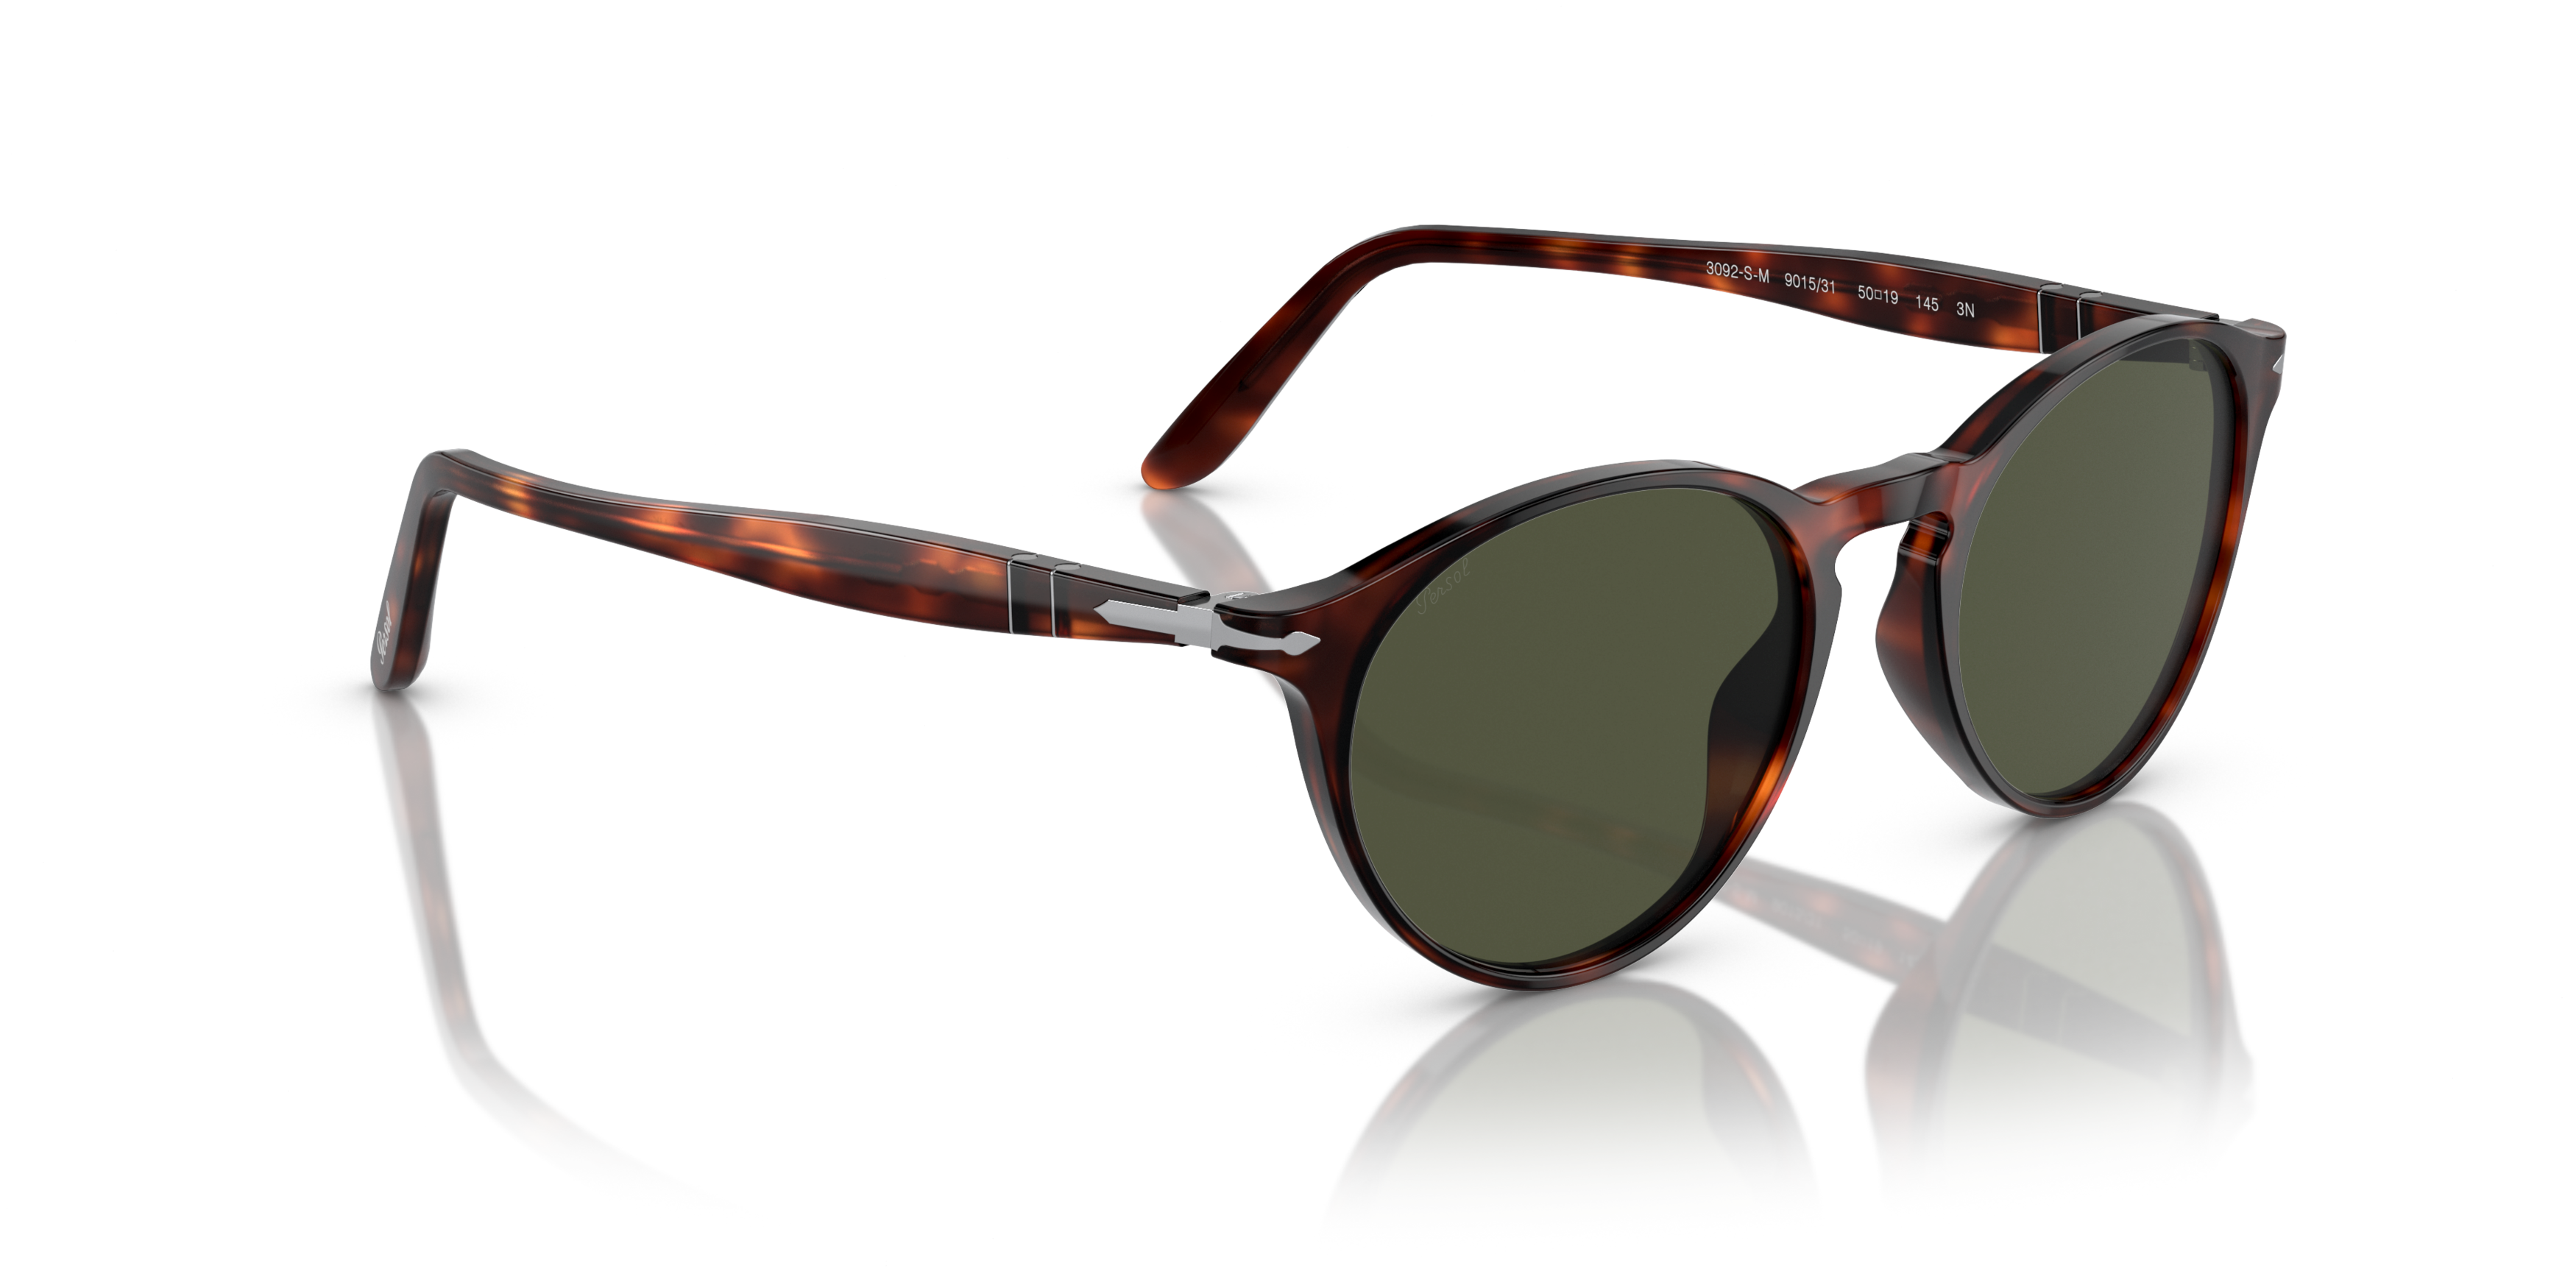 [products.image.angle_right01] Persol 0PO3092SM 901531 Solbriller